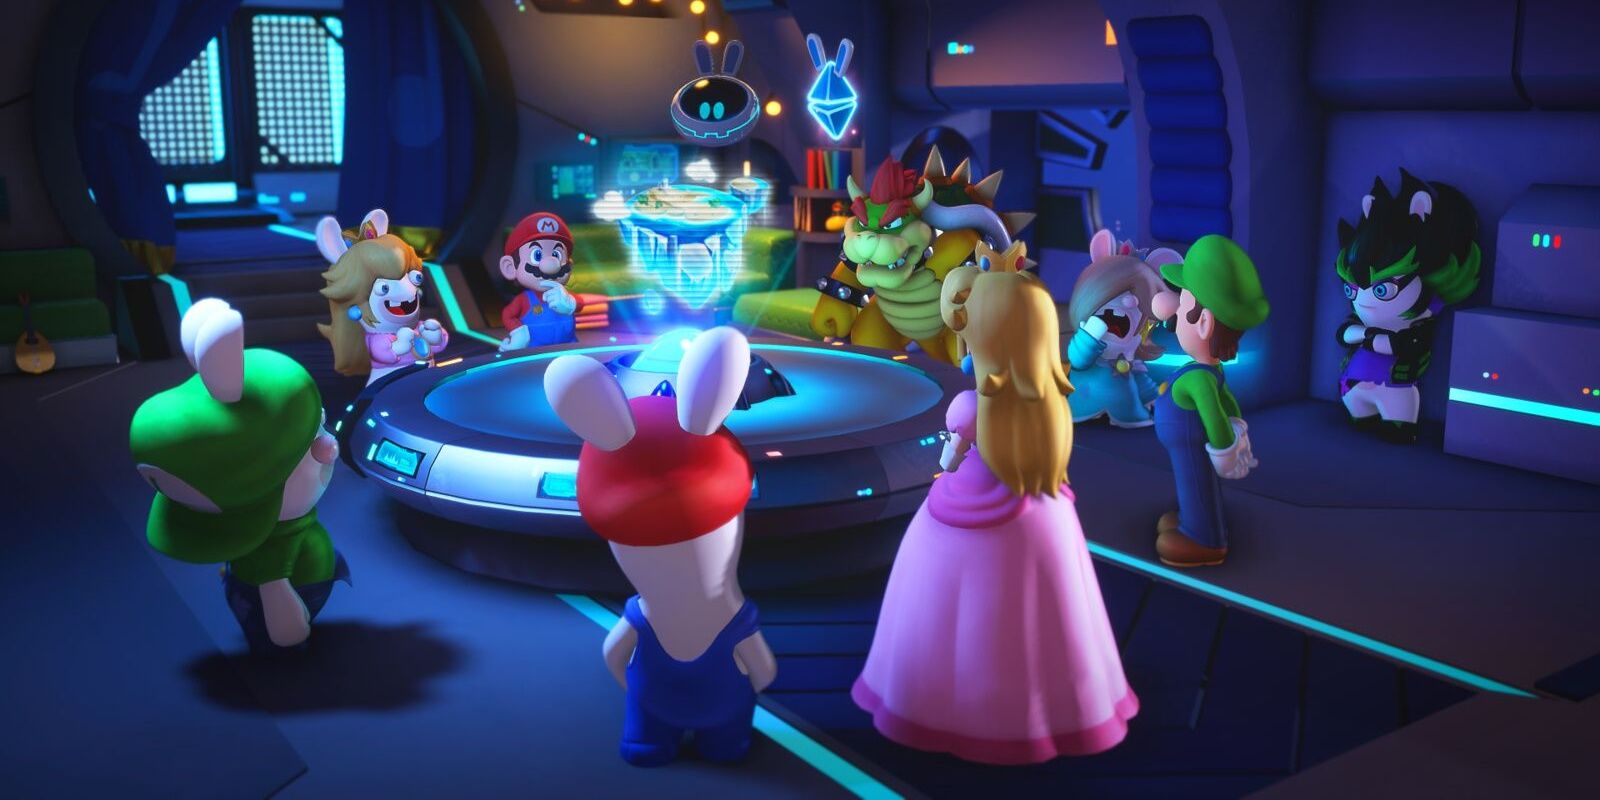 Mario Rabbids Sparks of Hope characters